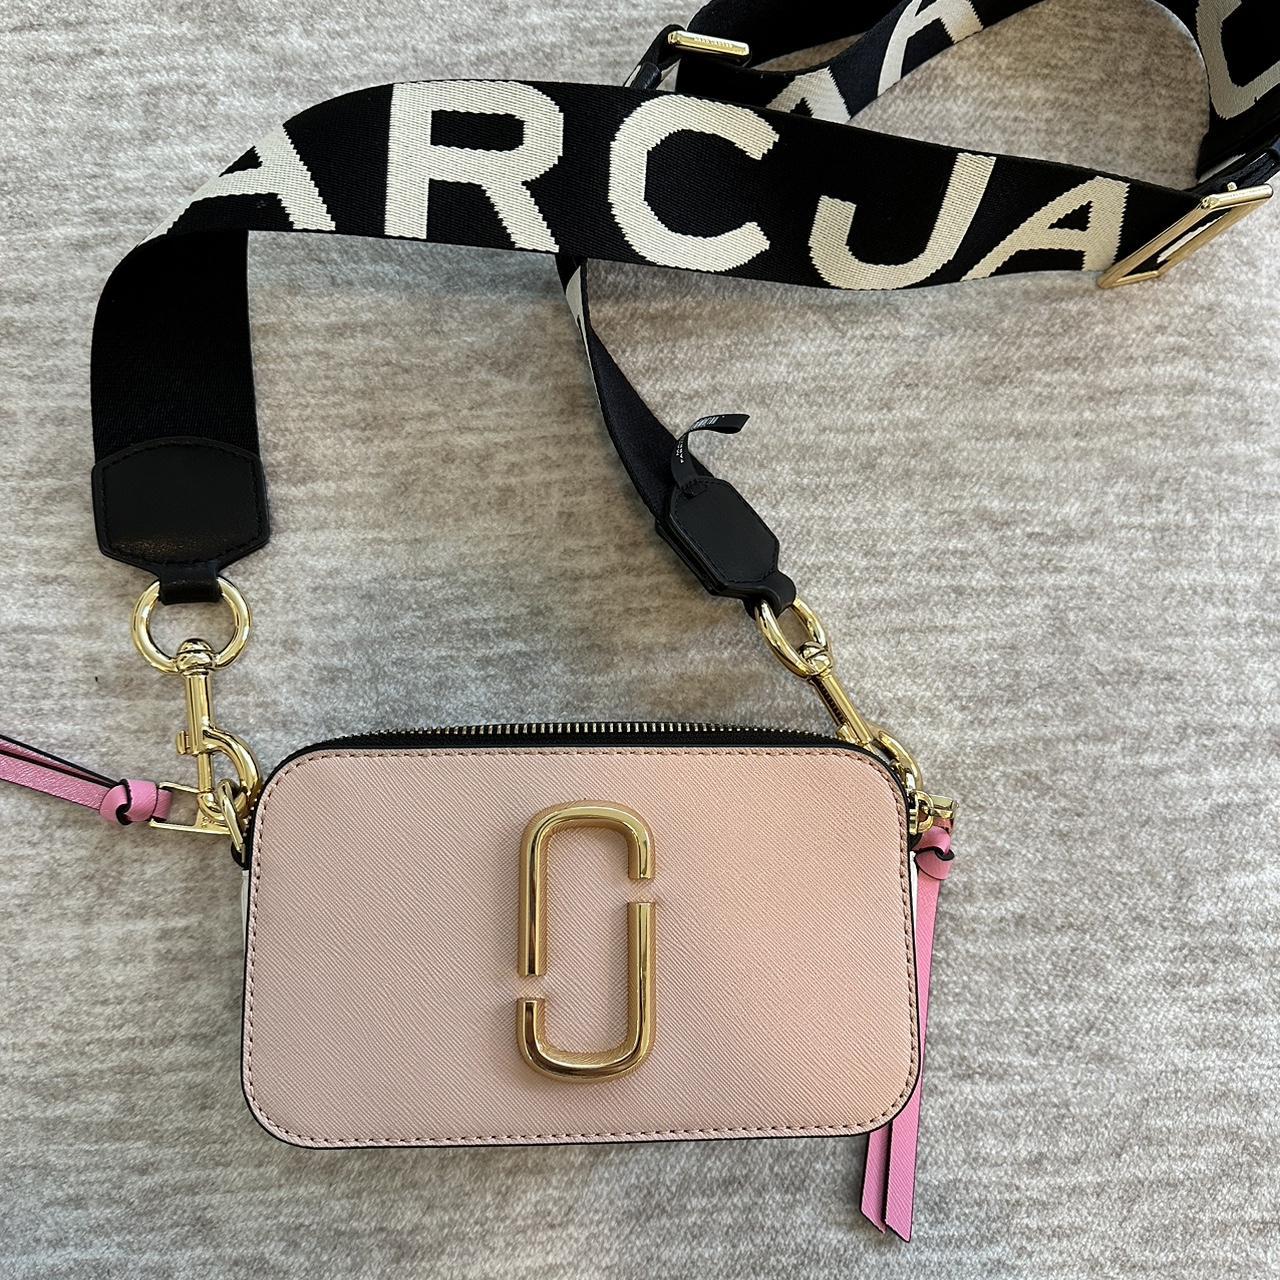 Pink Marc Jacobs Bag •The tote bag •small tote - Depop